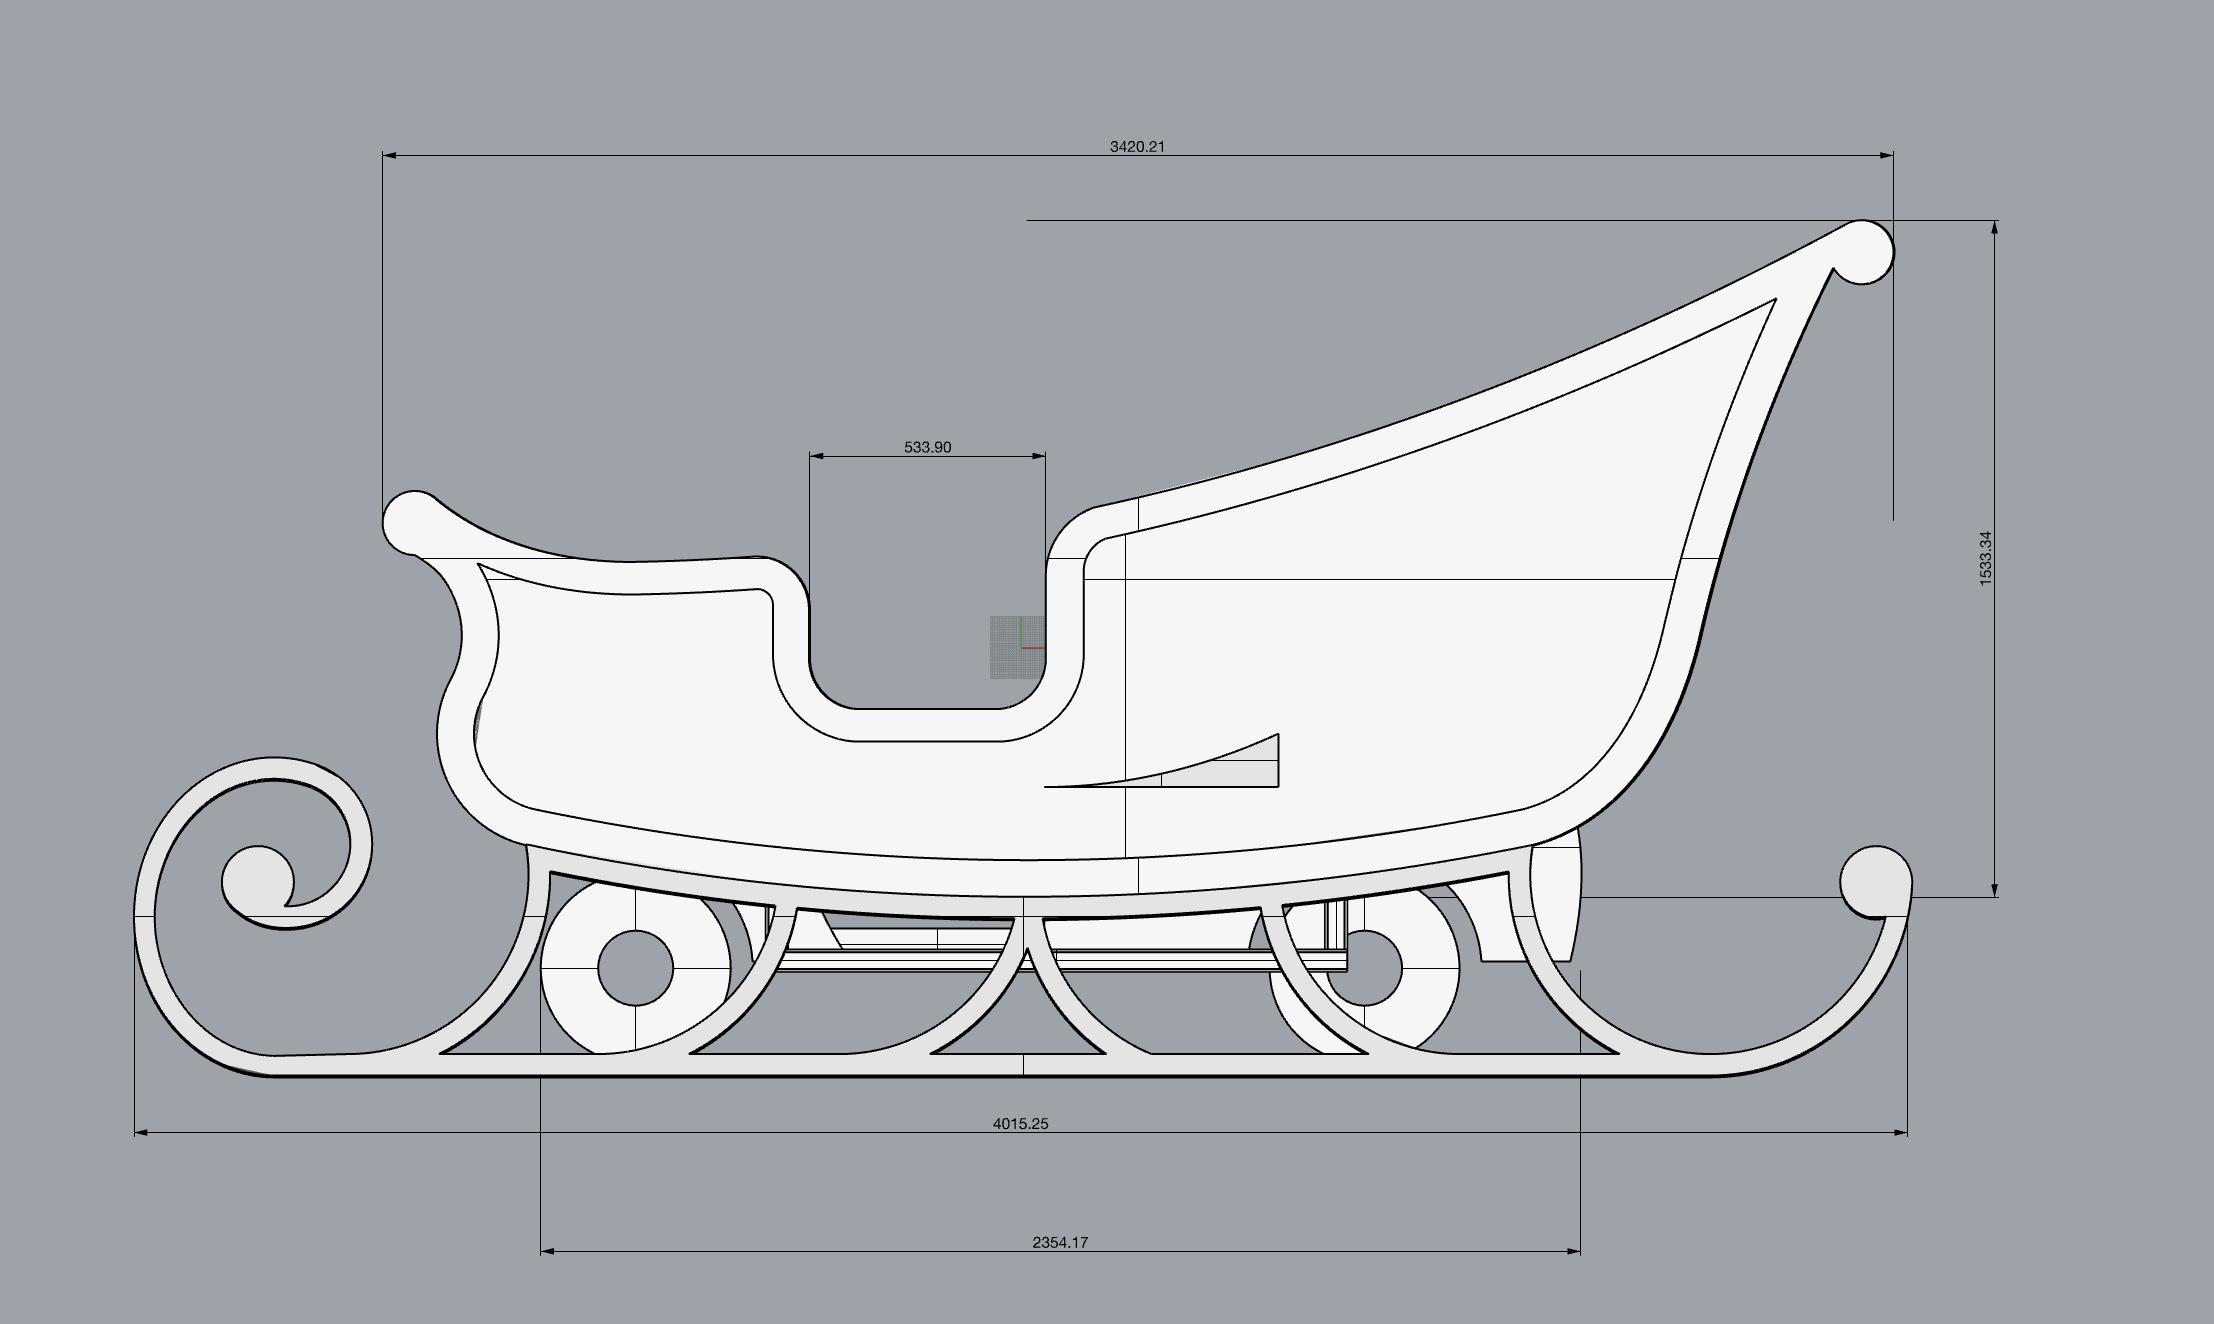 Sleigh_Design_2023-11-27 at 11.04.11.png